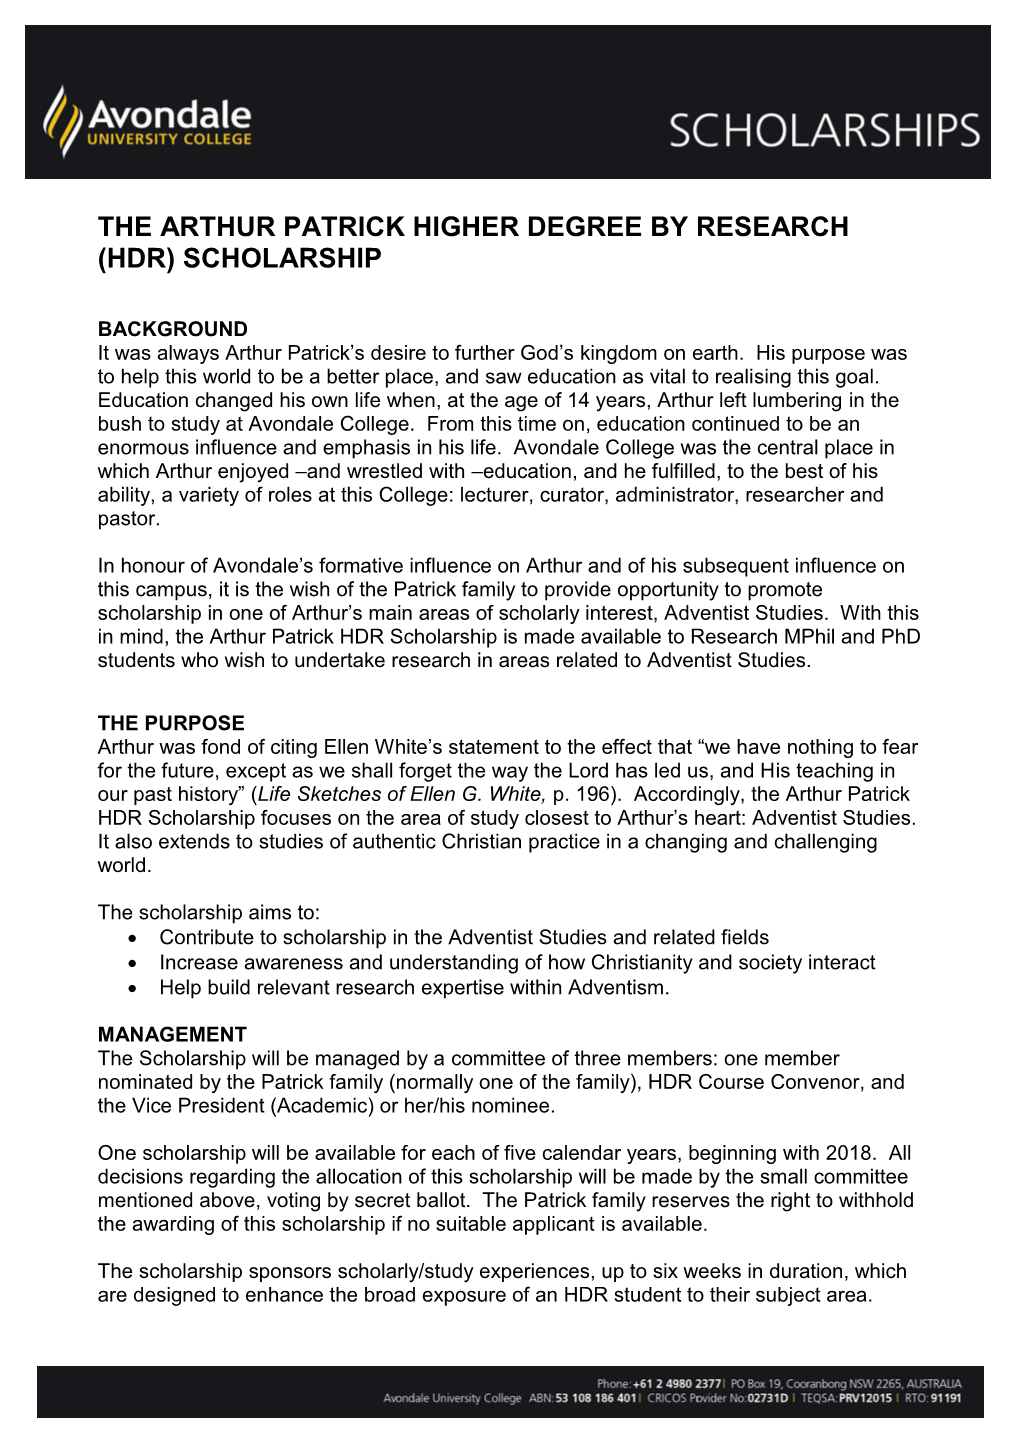 The Arthur Patrick Higher Degree by Research (Hdr) Scholarship